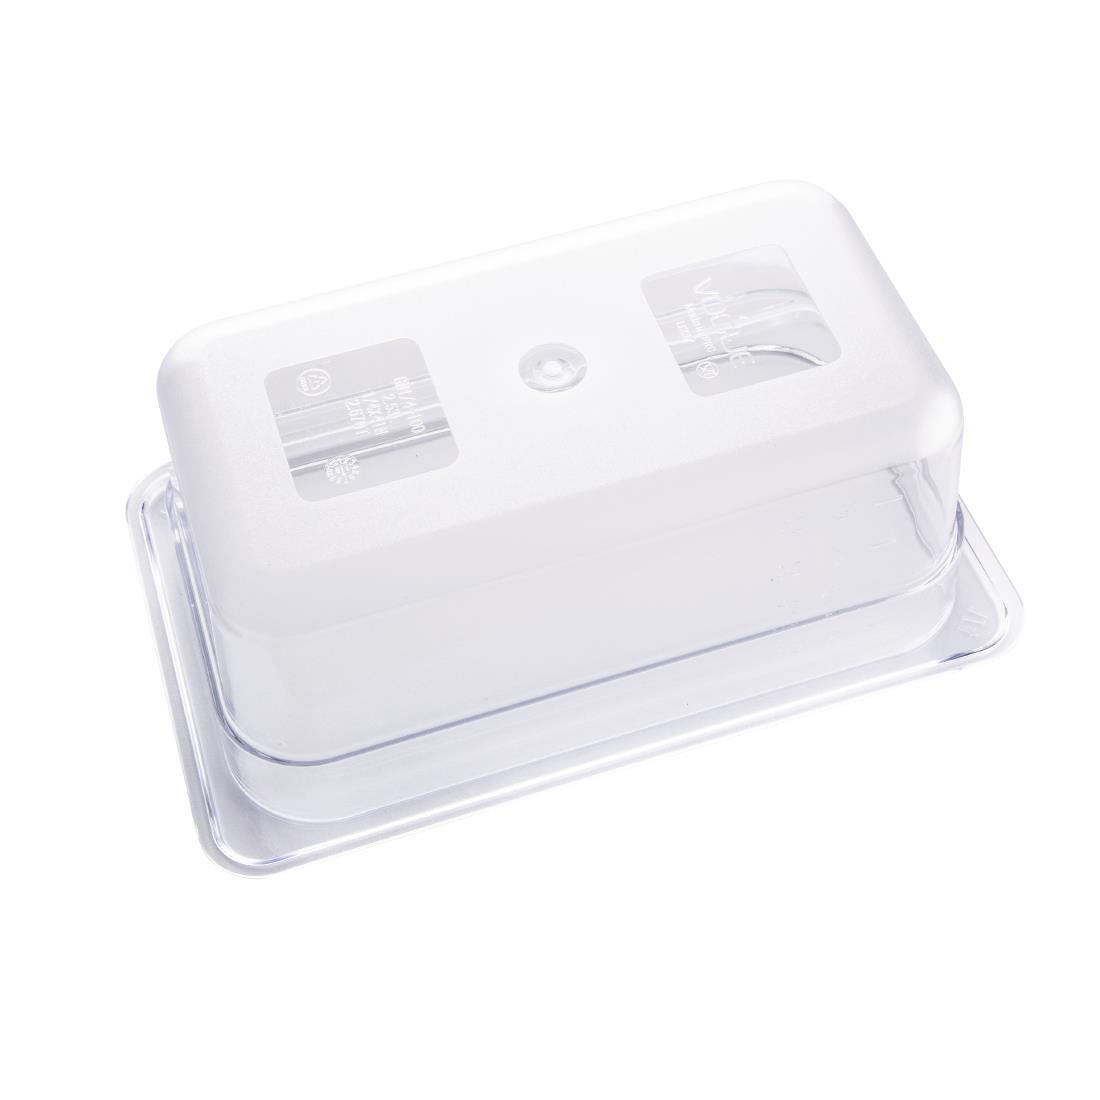 Vogue Polycarbonate 1/4 Gastronorm Container 100mm Clear - U237  - 5